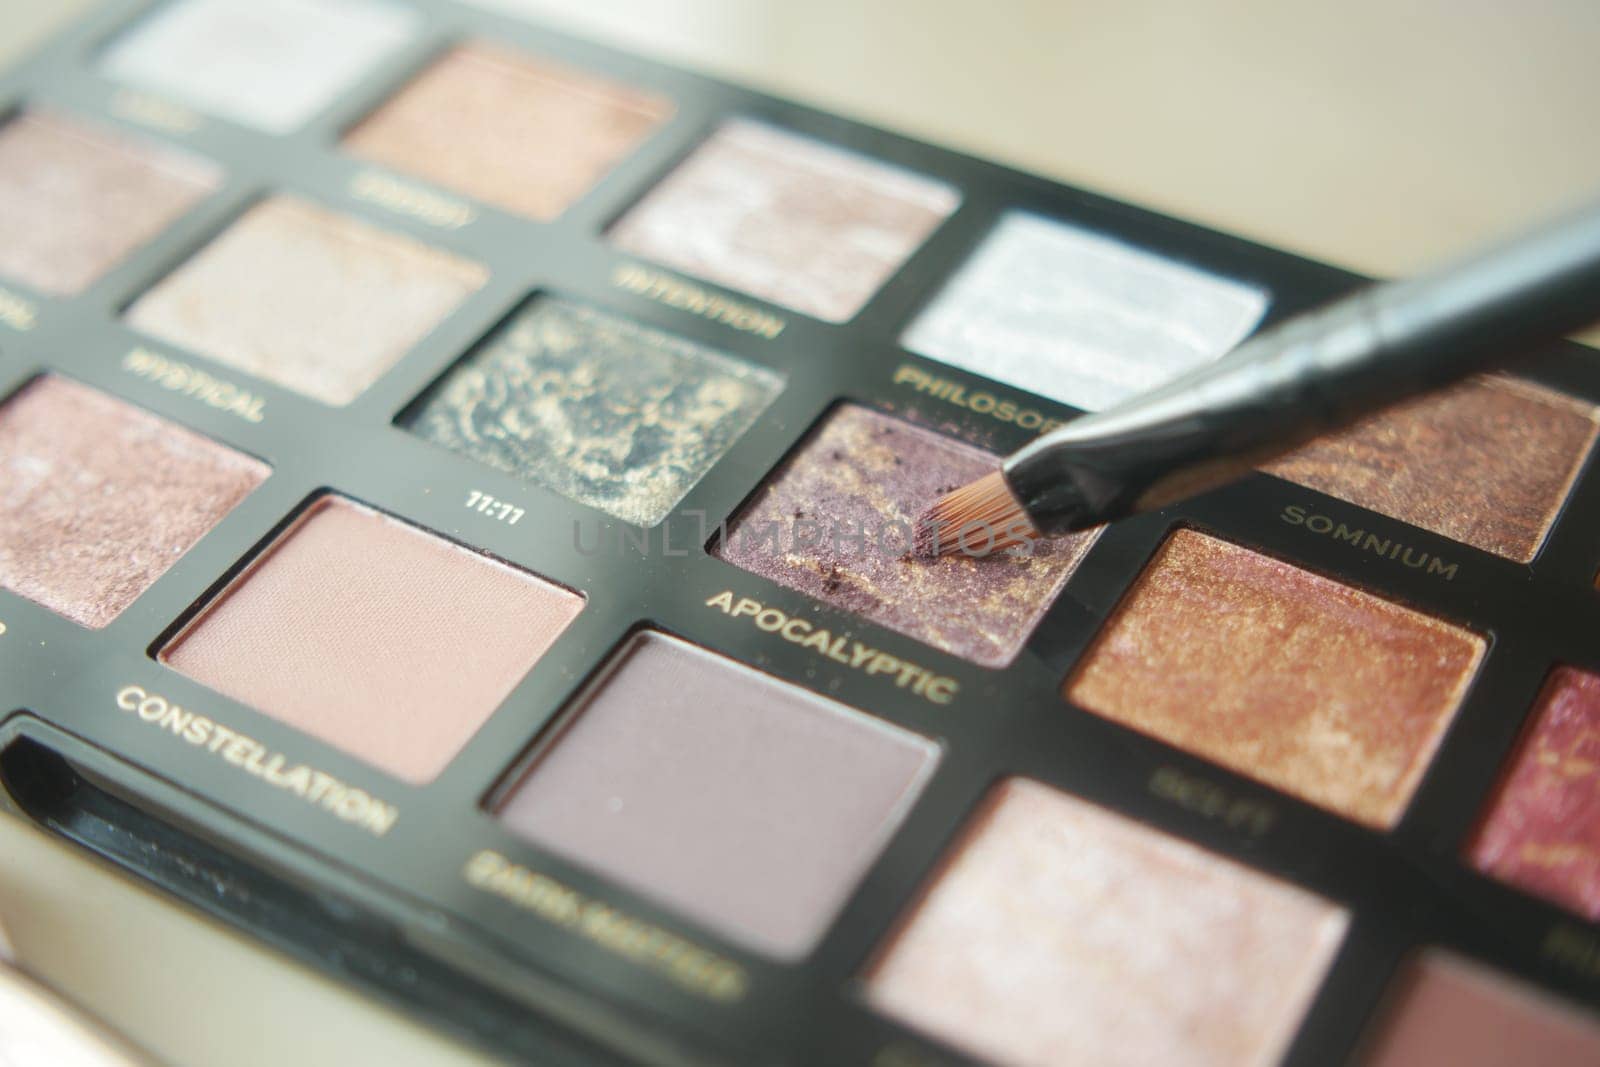 A palette with eye shadows and a makeup brush